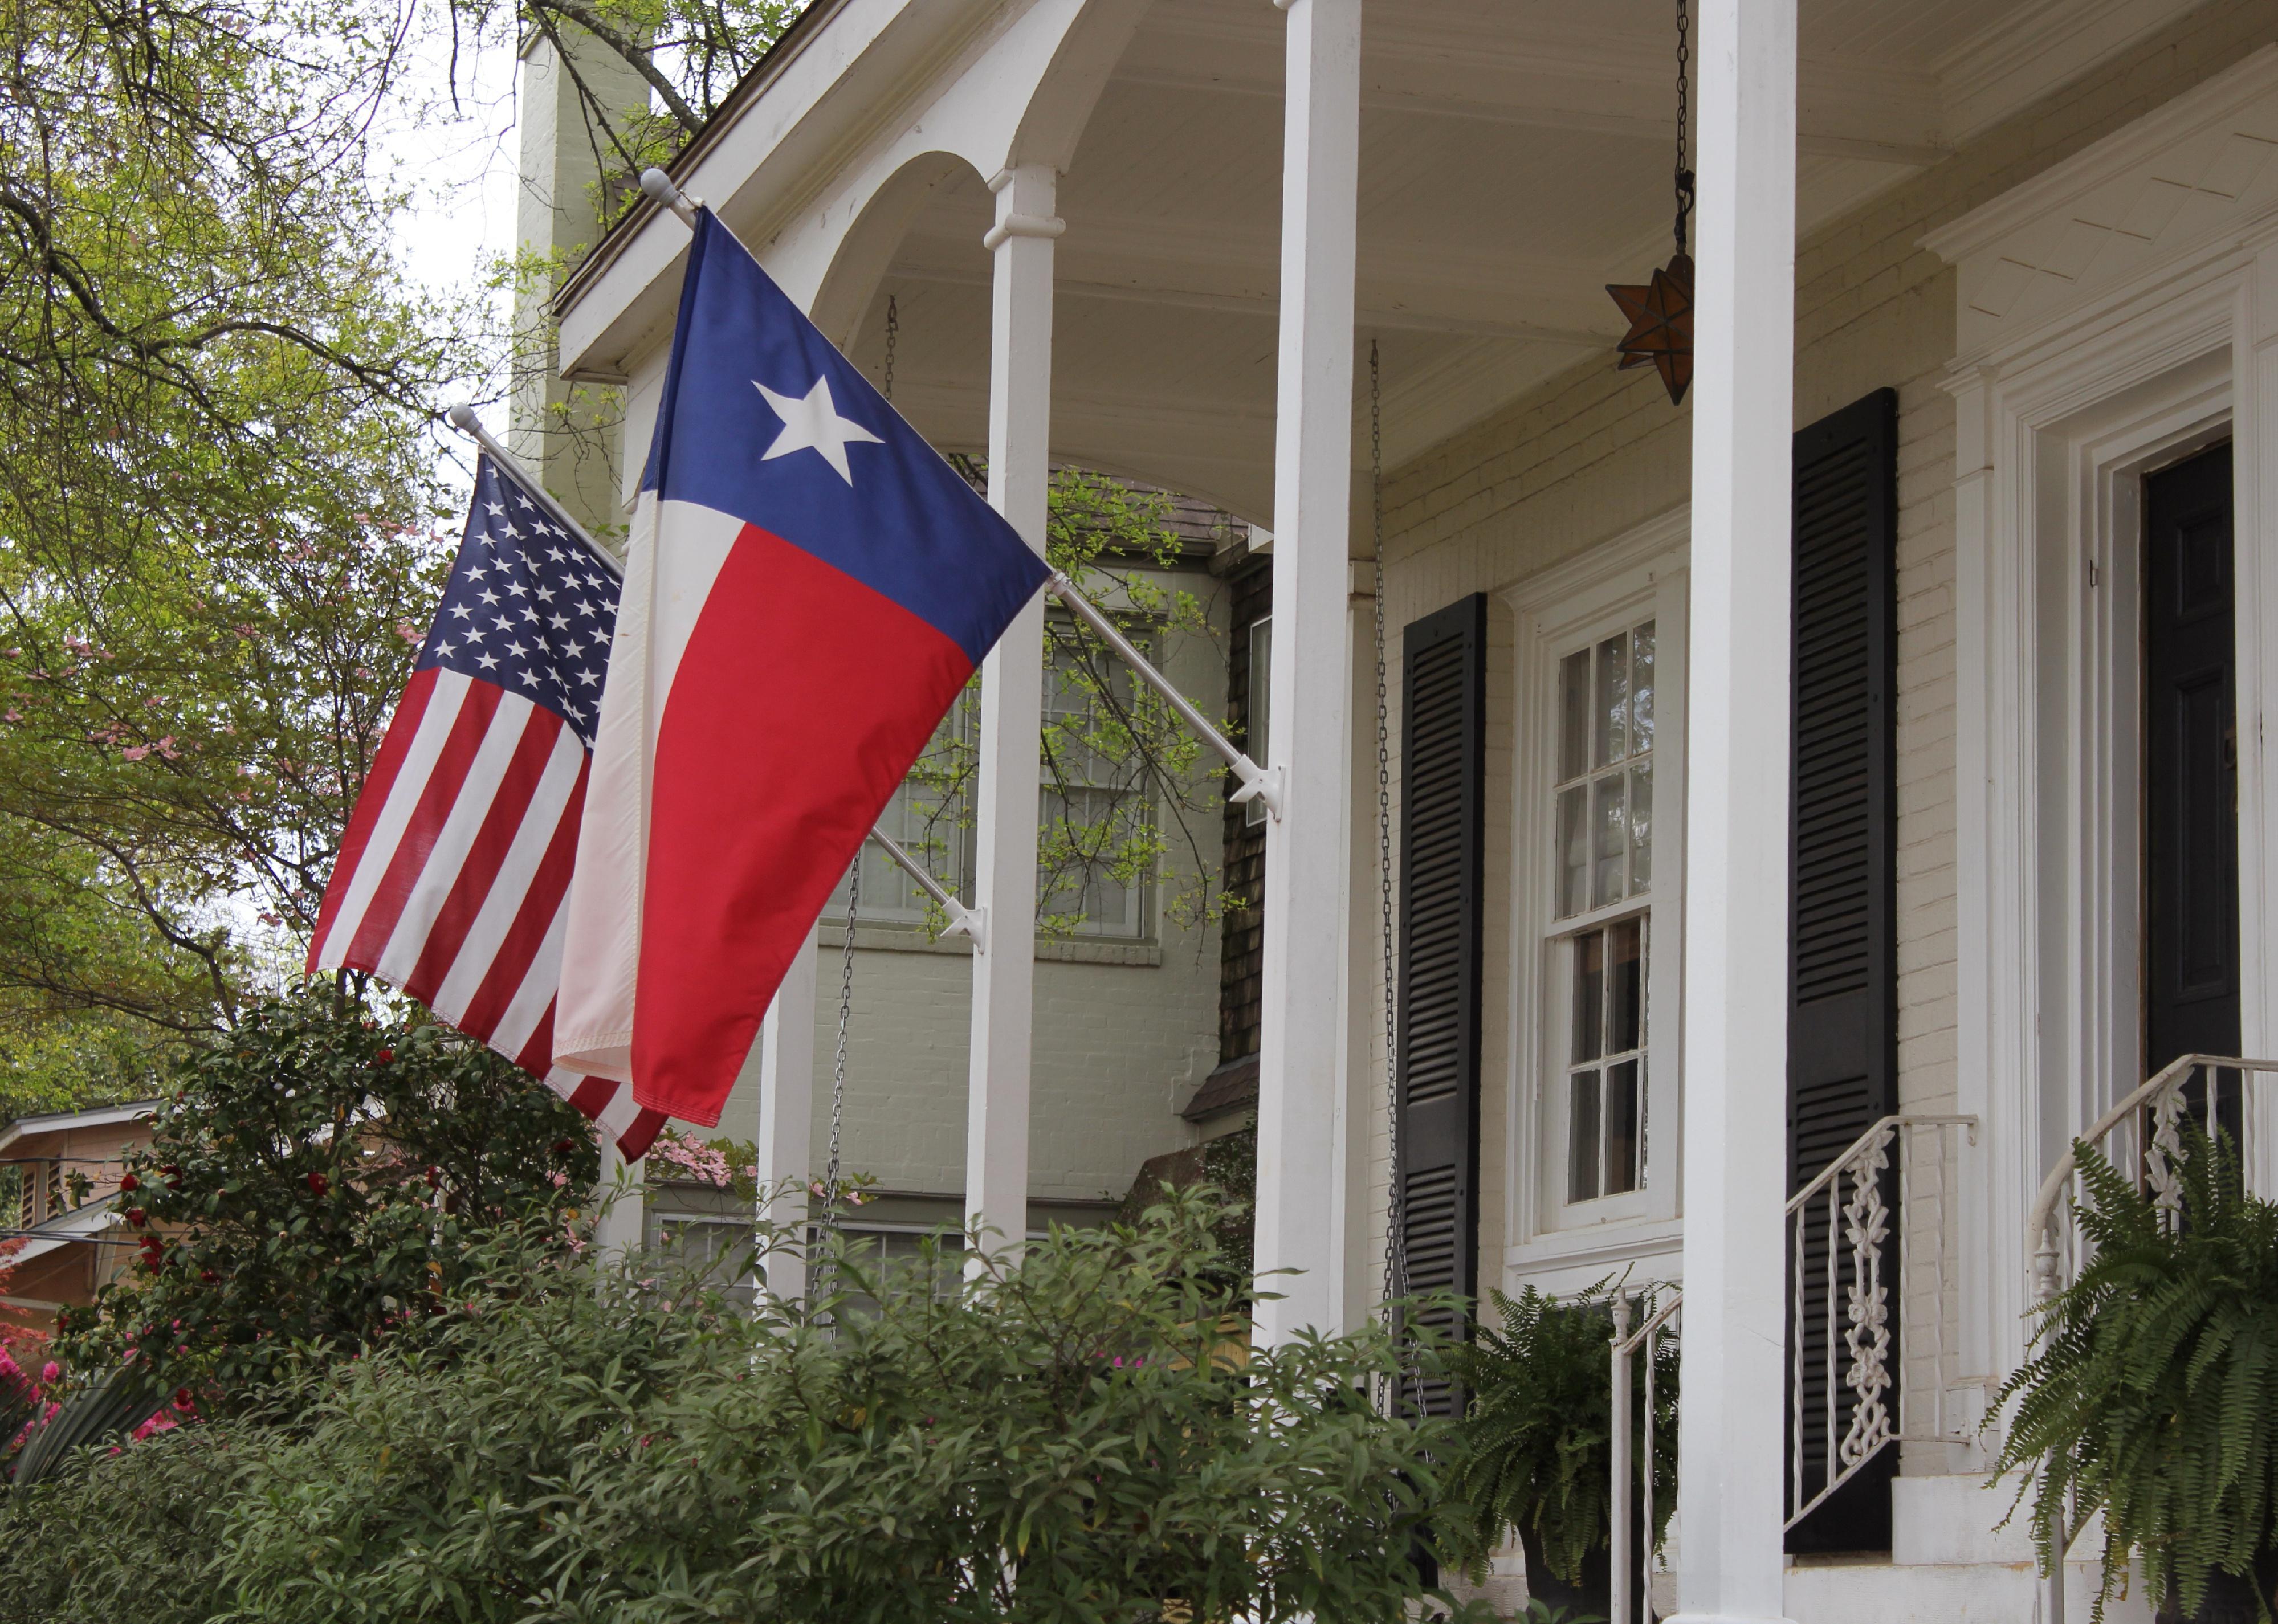 A large white home with dark shutters and a U.S. flag and a Texas flag flying in front.